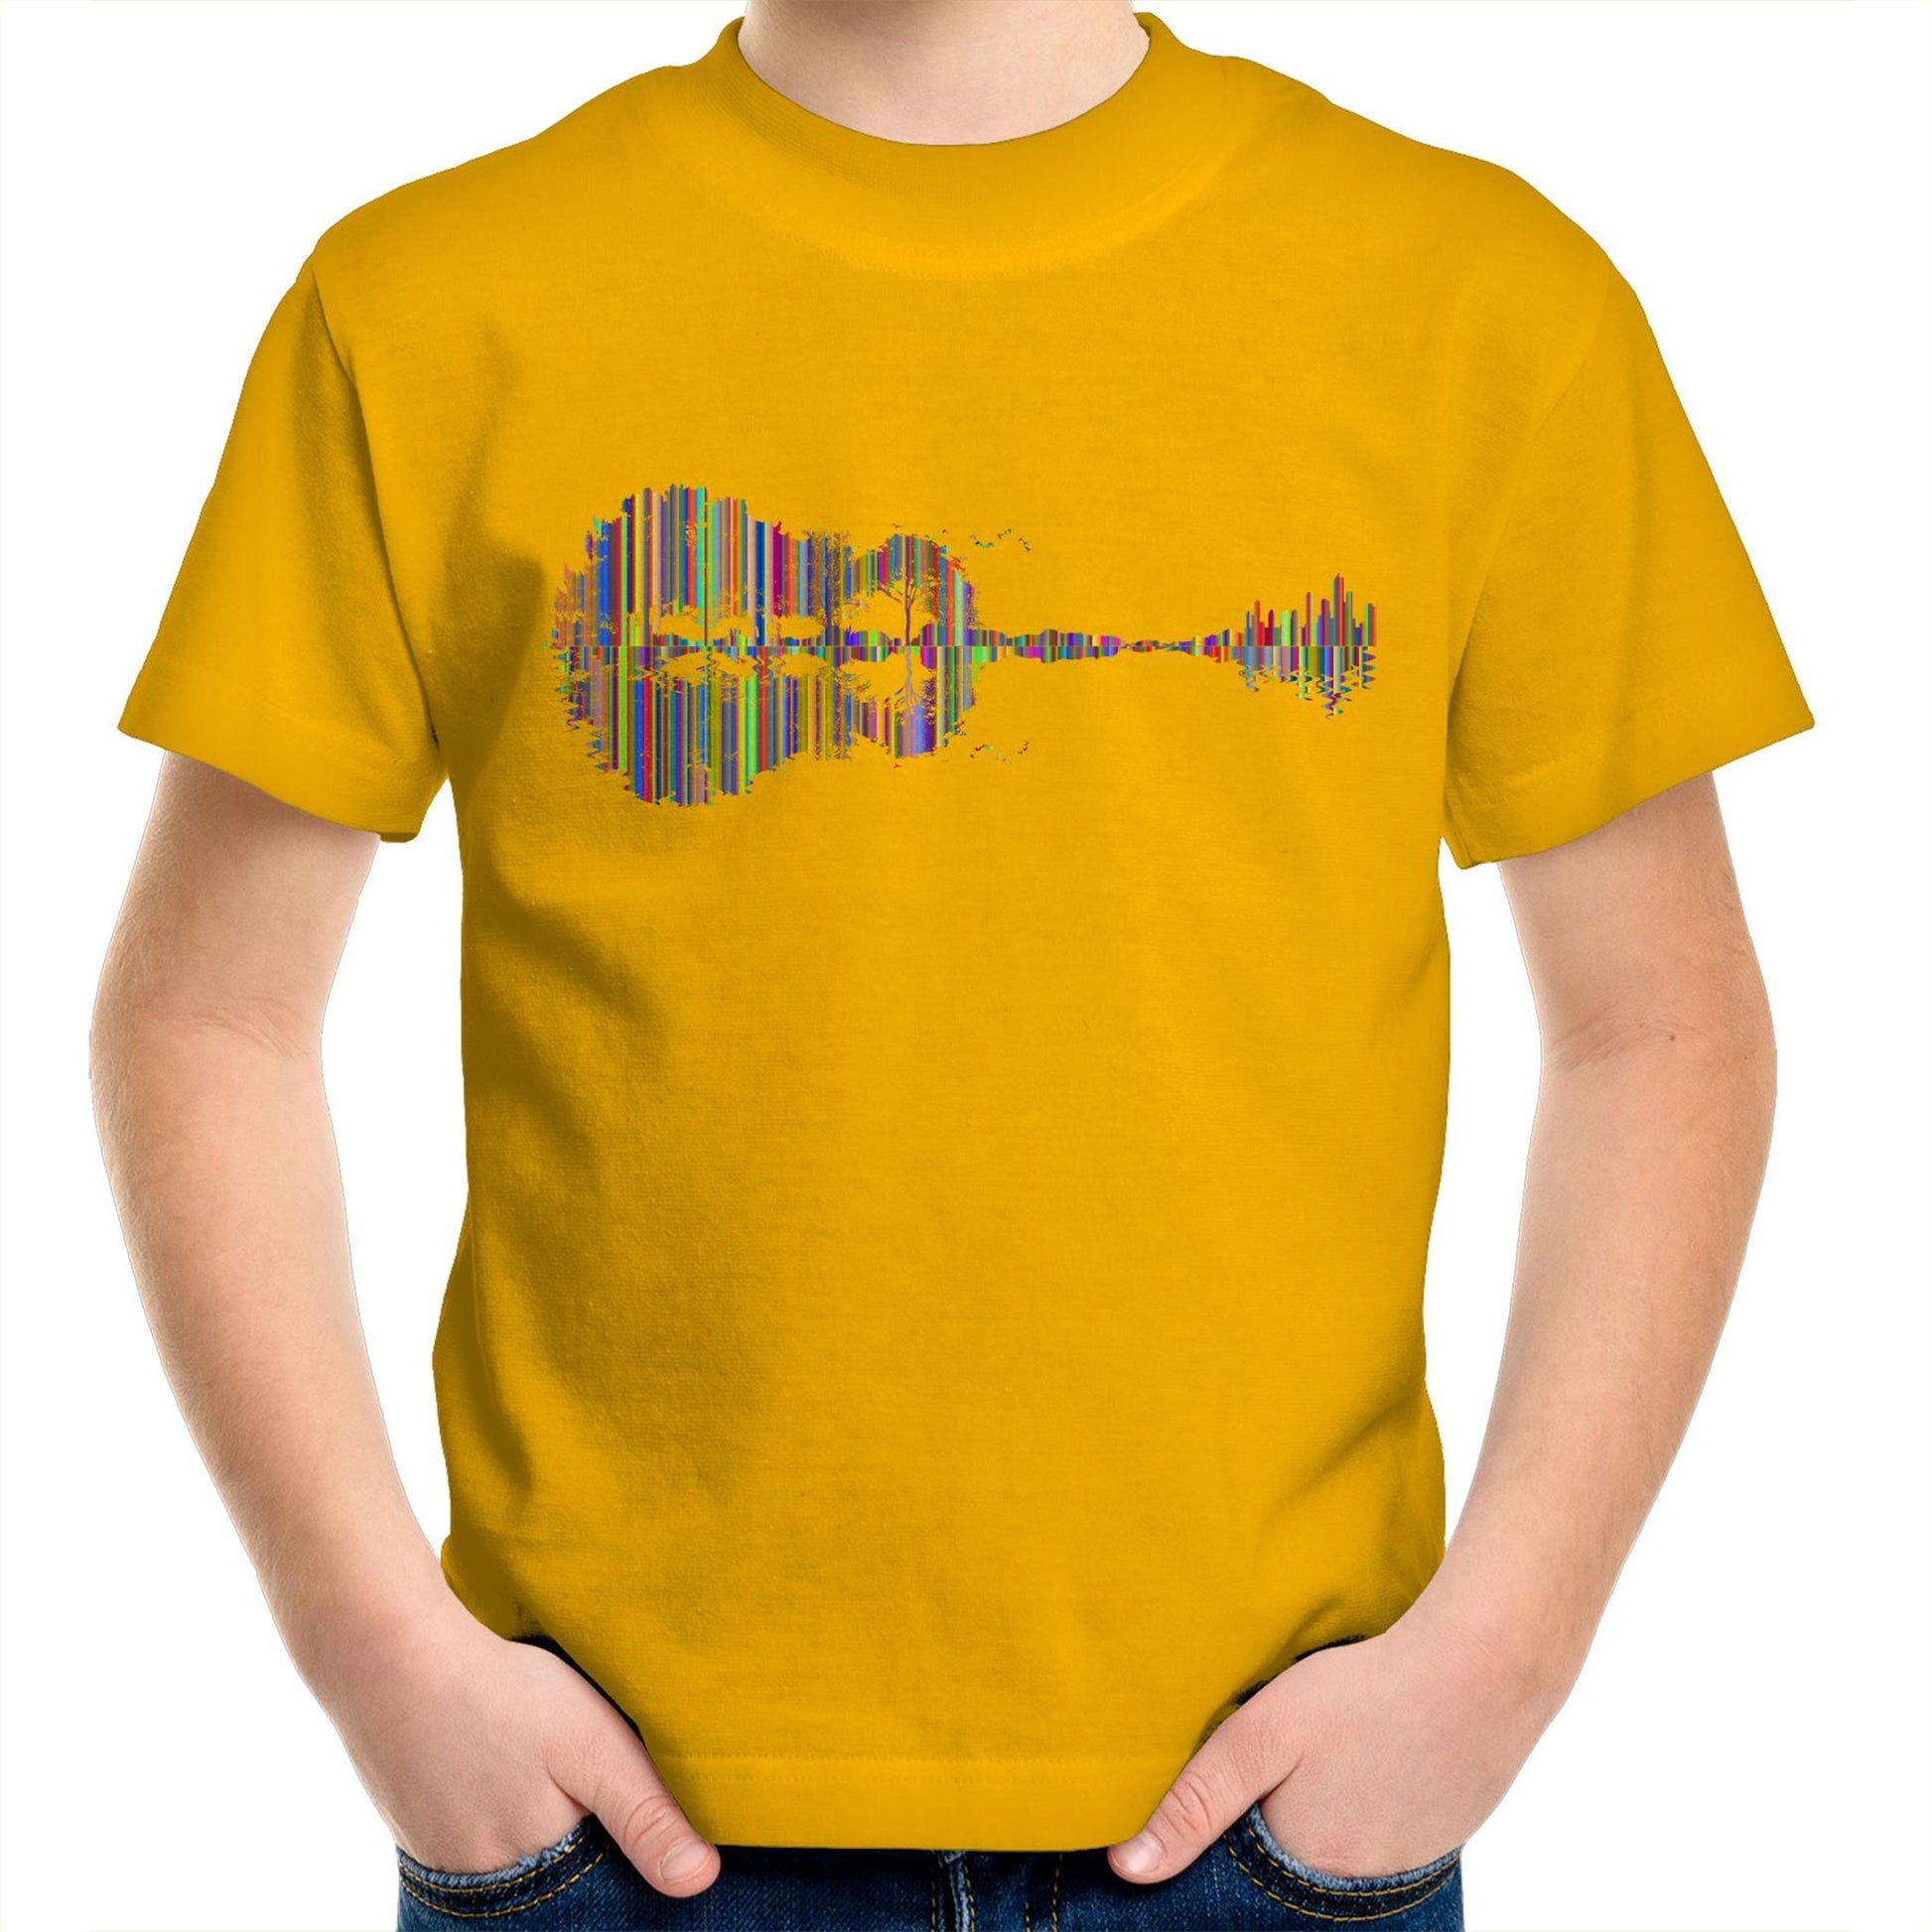 Guitar Reflection In Colour - Kids Youth Crew T-Shirt Gold Kids Youth T-shirt Music